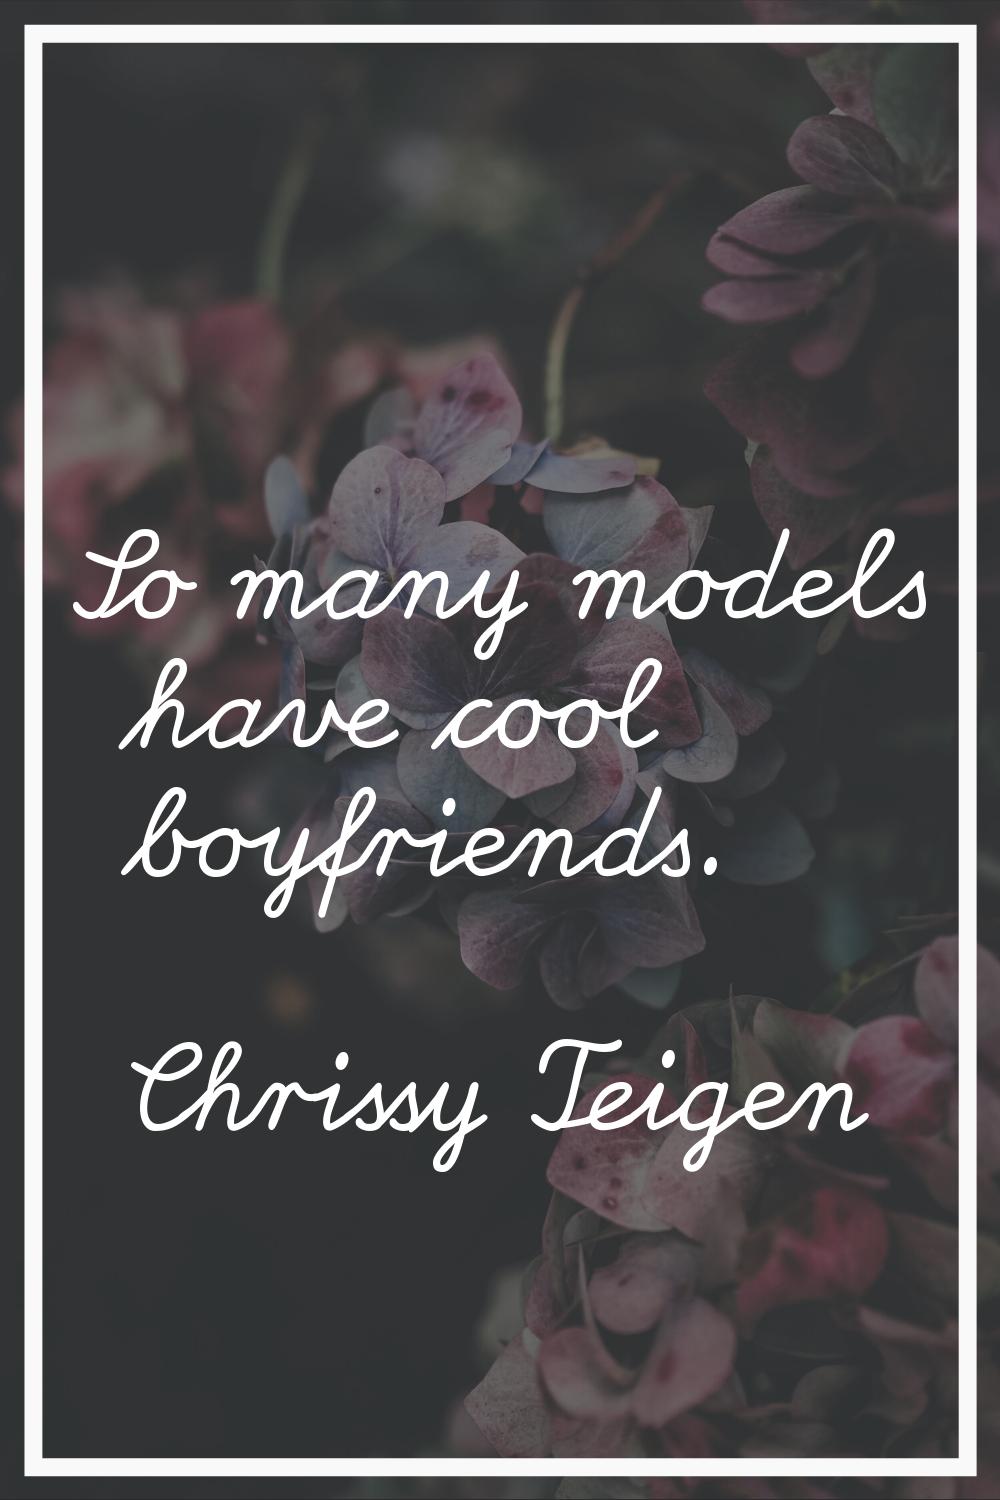 So many models have cool boyfriends.